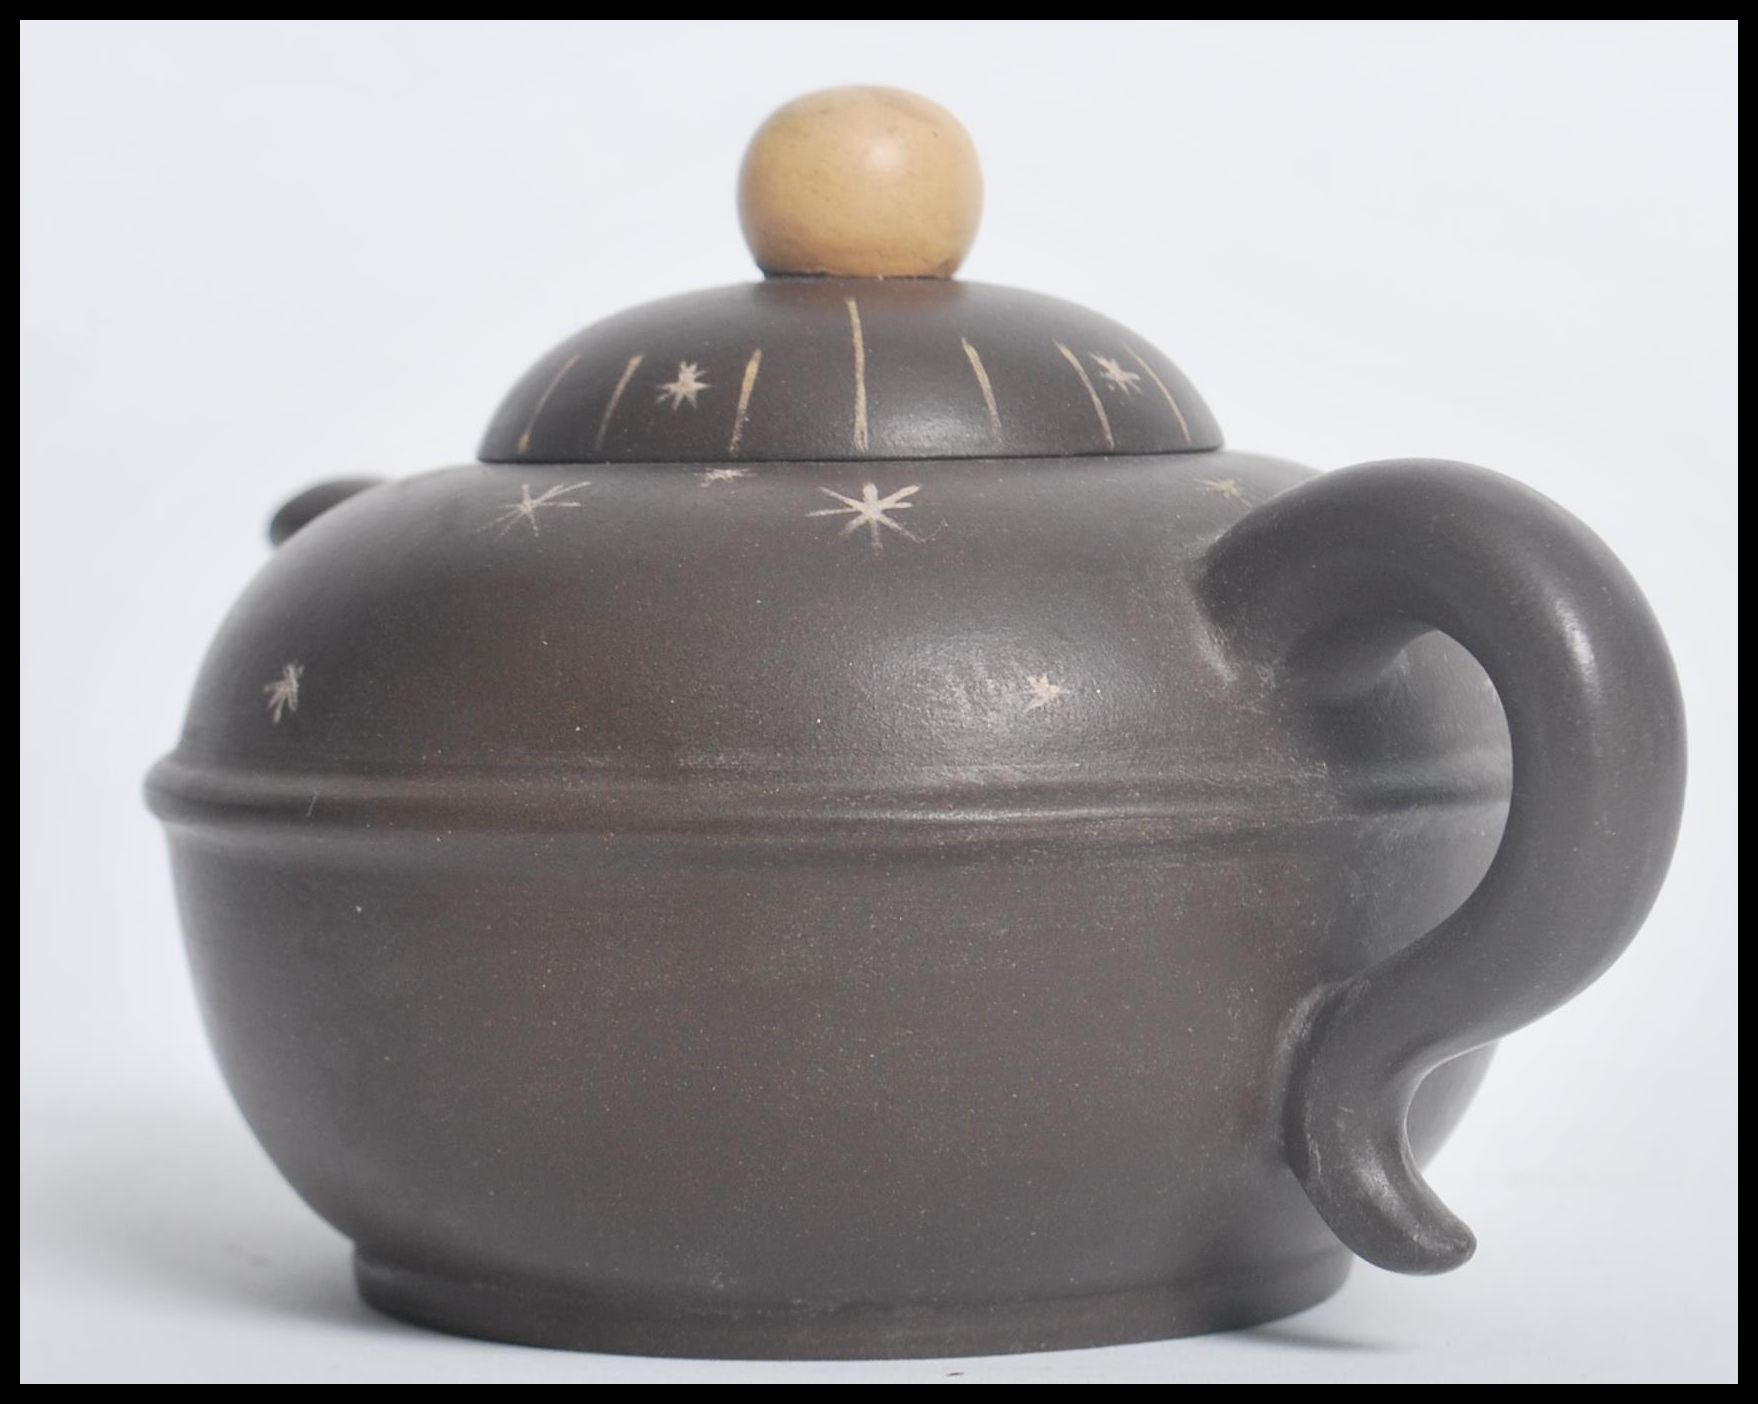 A Chinese Yi Zing terracotta teapot having a ball finial lid with star decoration and character - Image 4 of 7